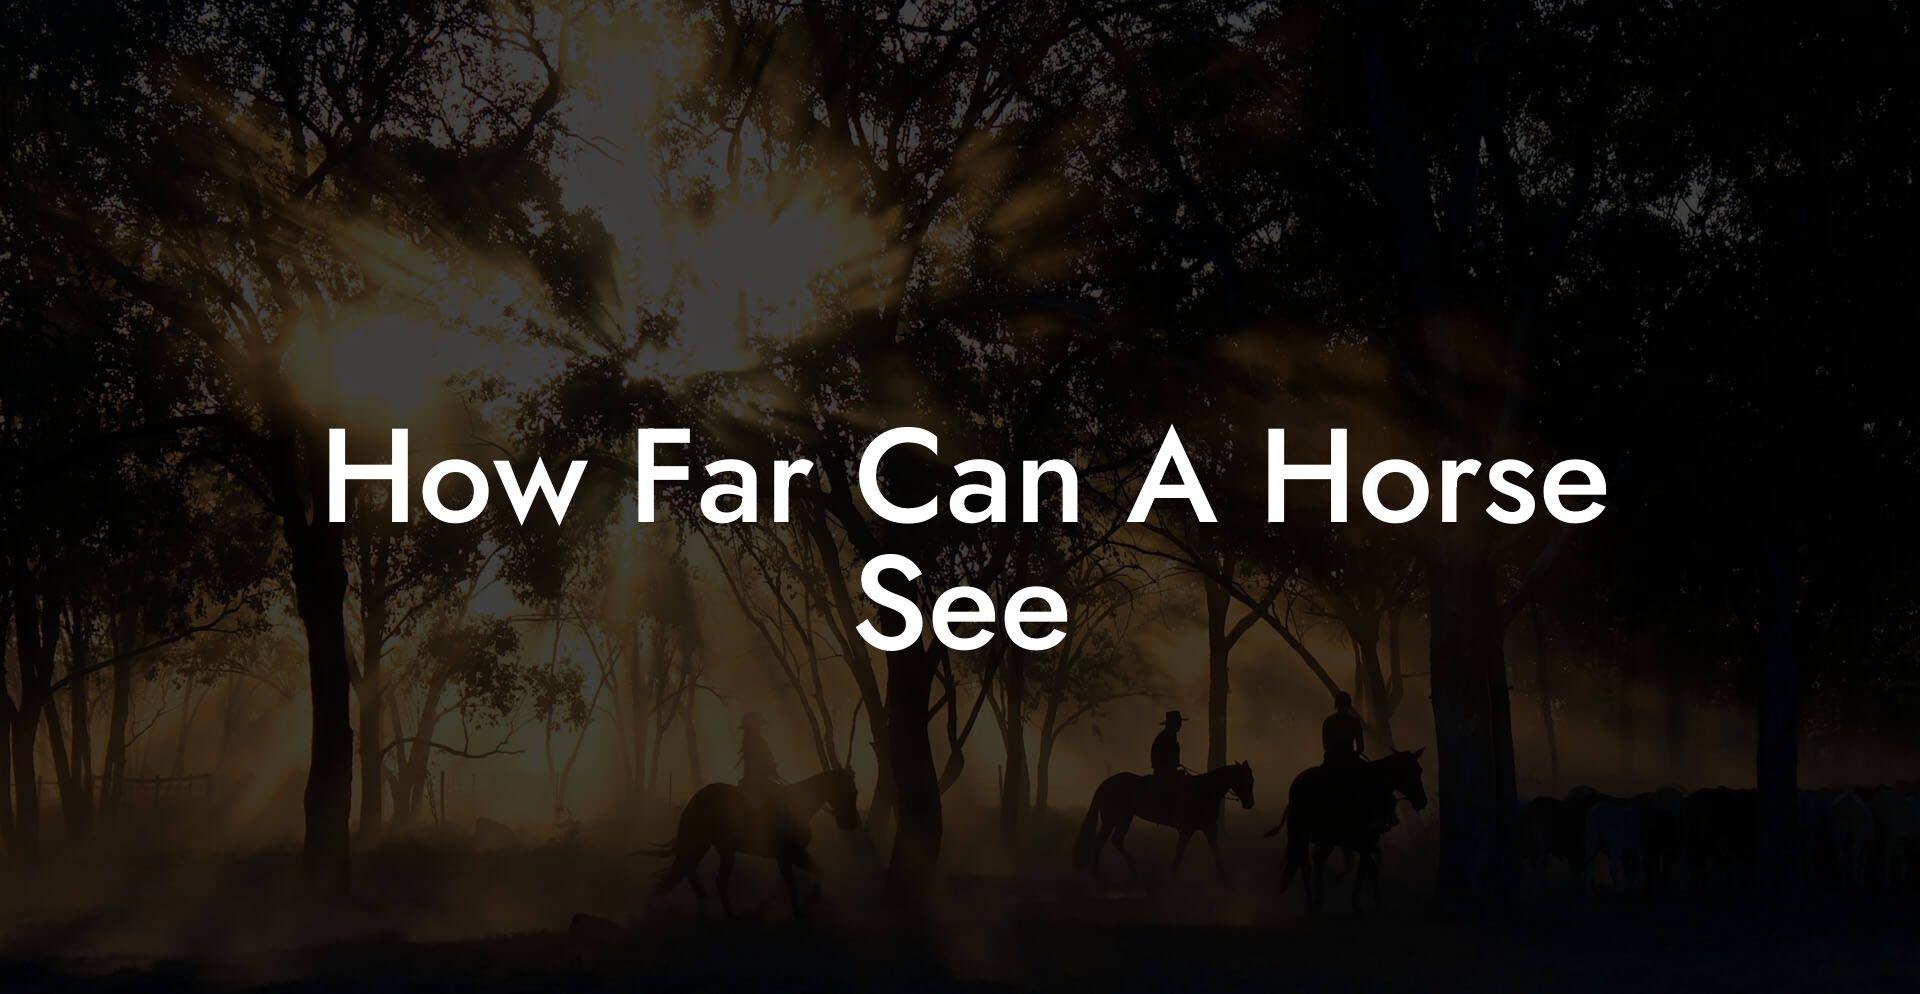 How Far Can A Horse See